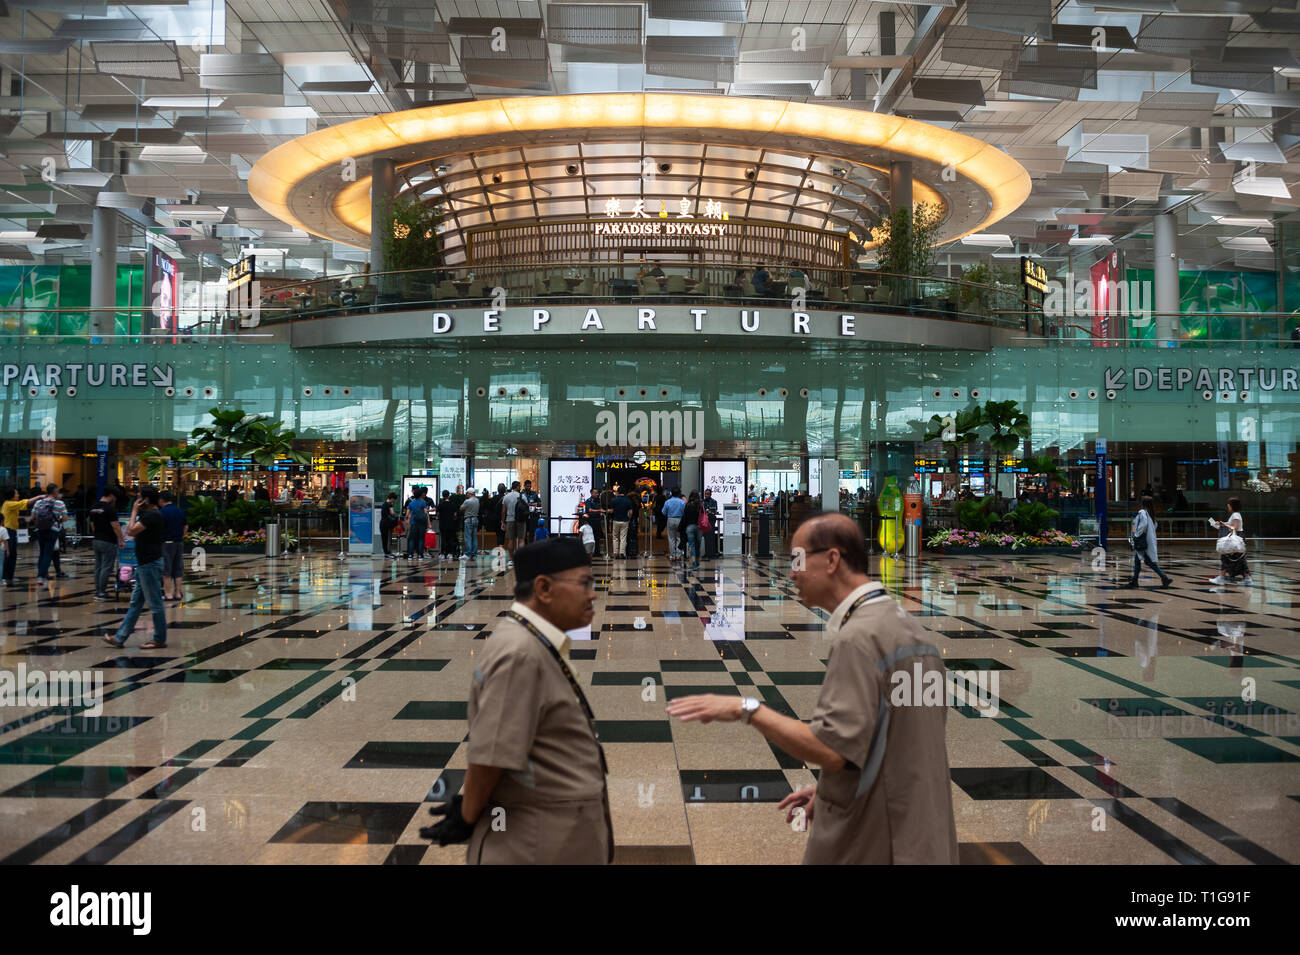 01.03.2019, Singapore, Singapore, Singapore - Two airport employees are talking in the departure hall of Terminal 3 at Changi Airport. 0SL190301D035CA Stock Photo